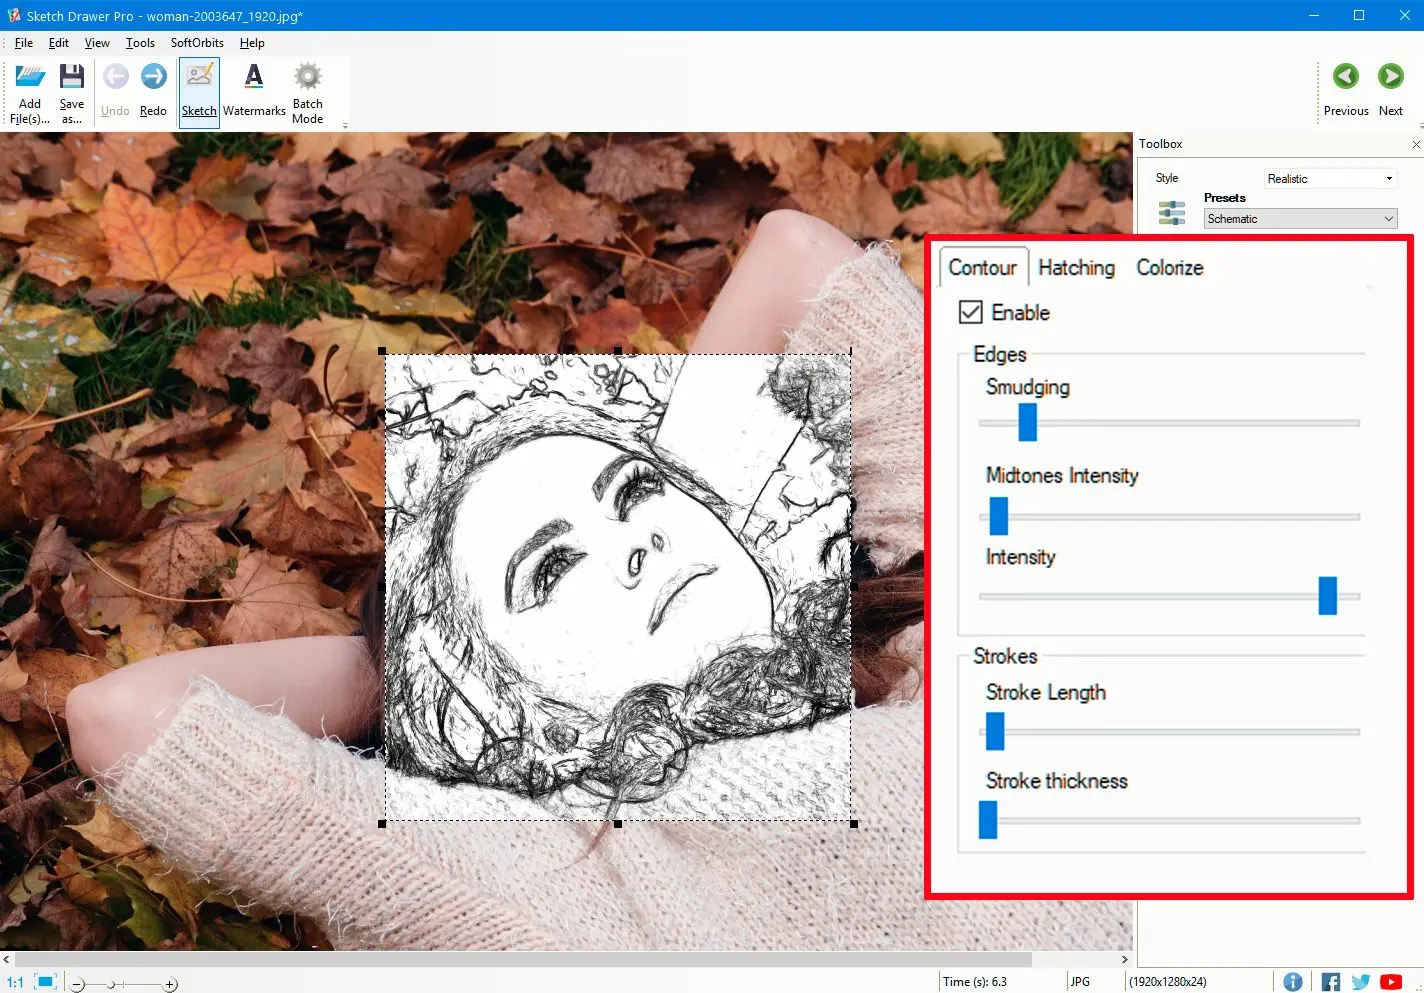 Picture to drawing converter: Set settings of the image..